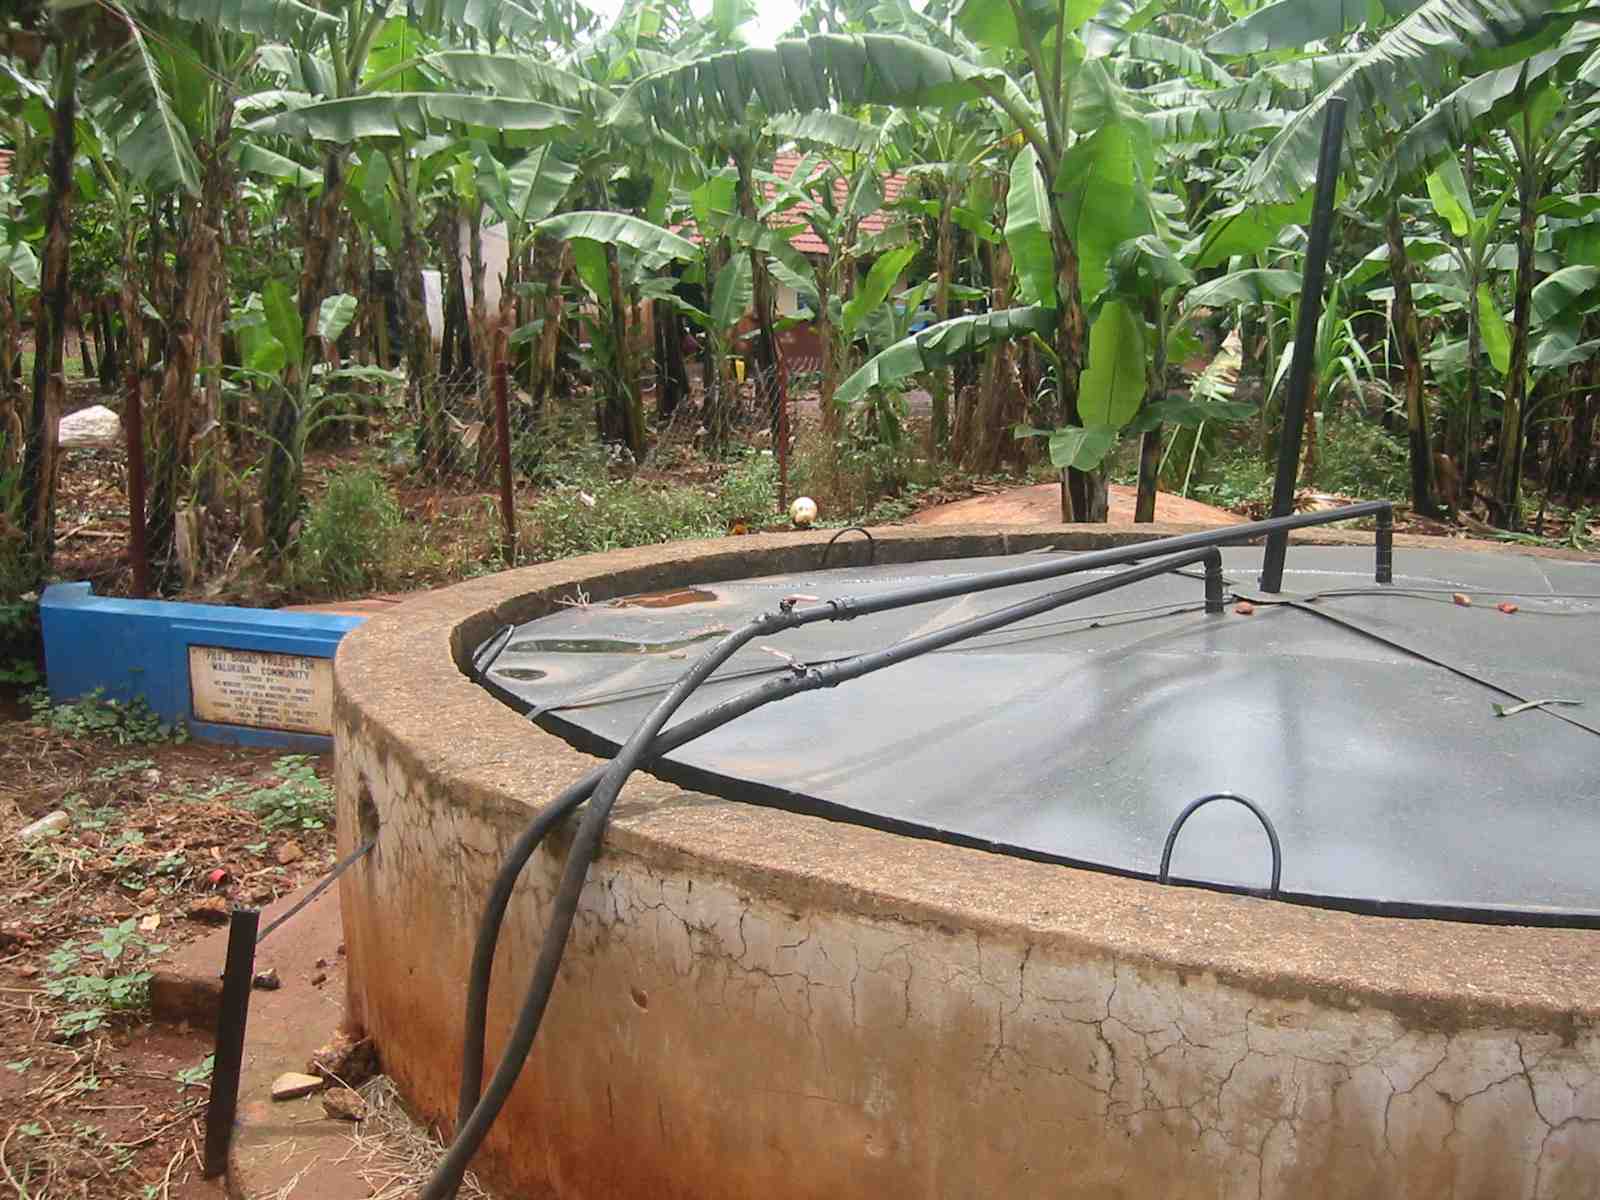 Commercial Aquaponics Training With Biogas &amp; Applied Permaculture 